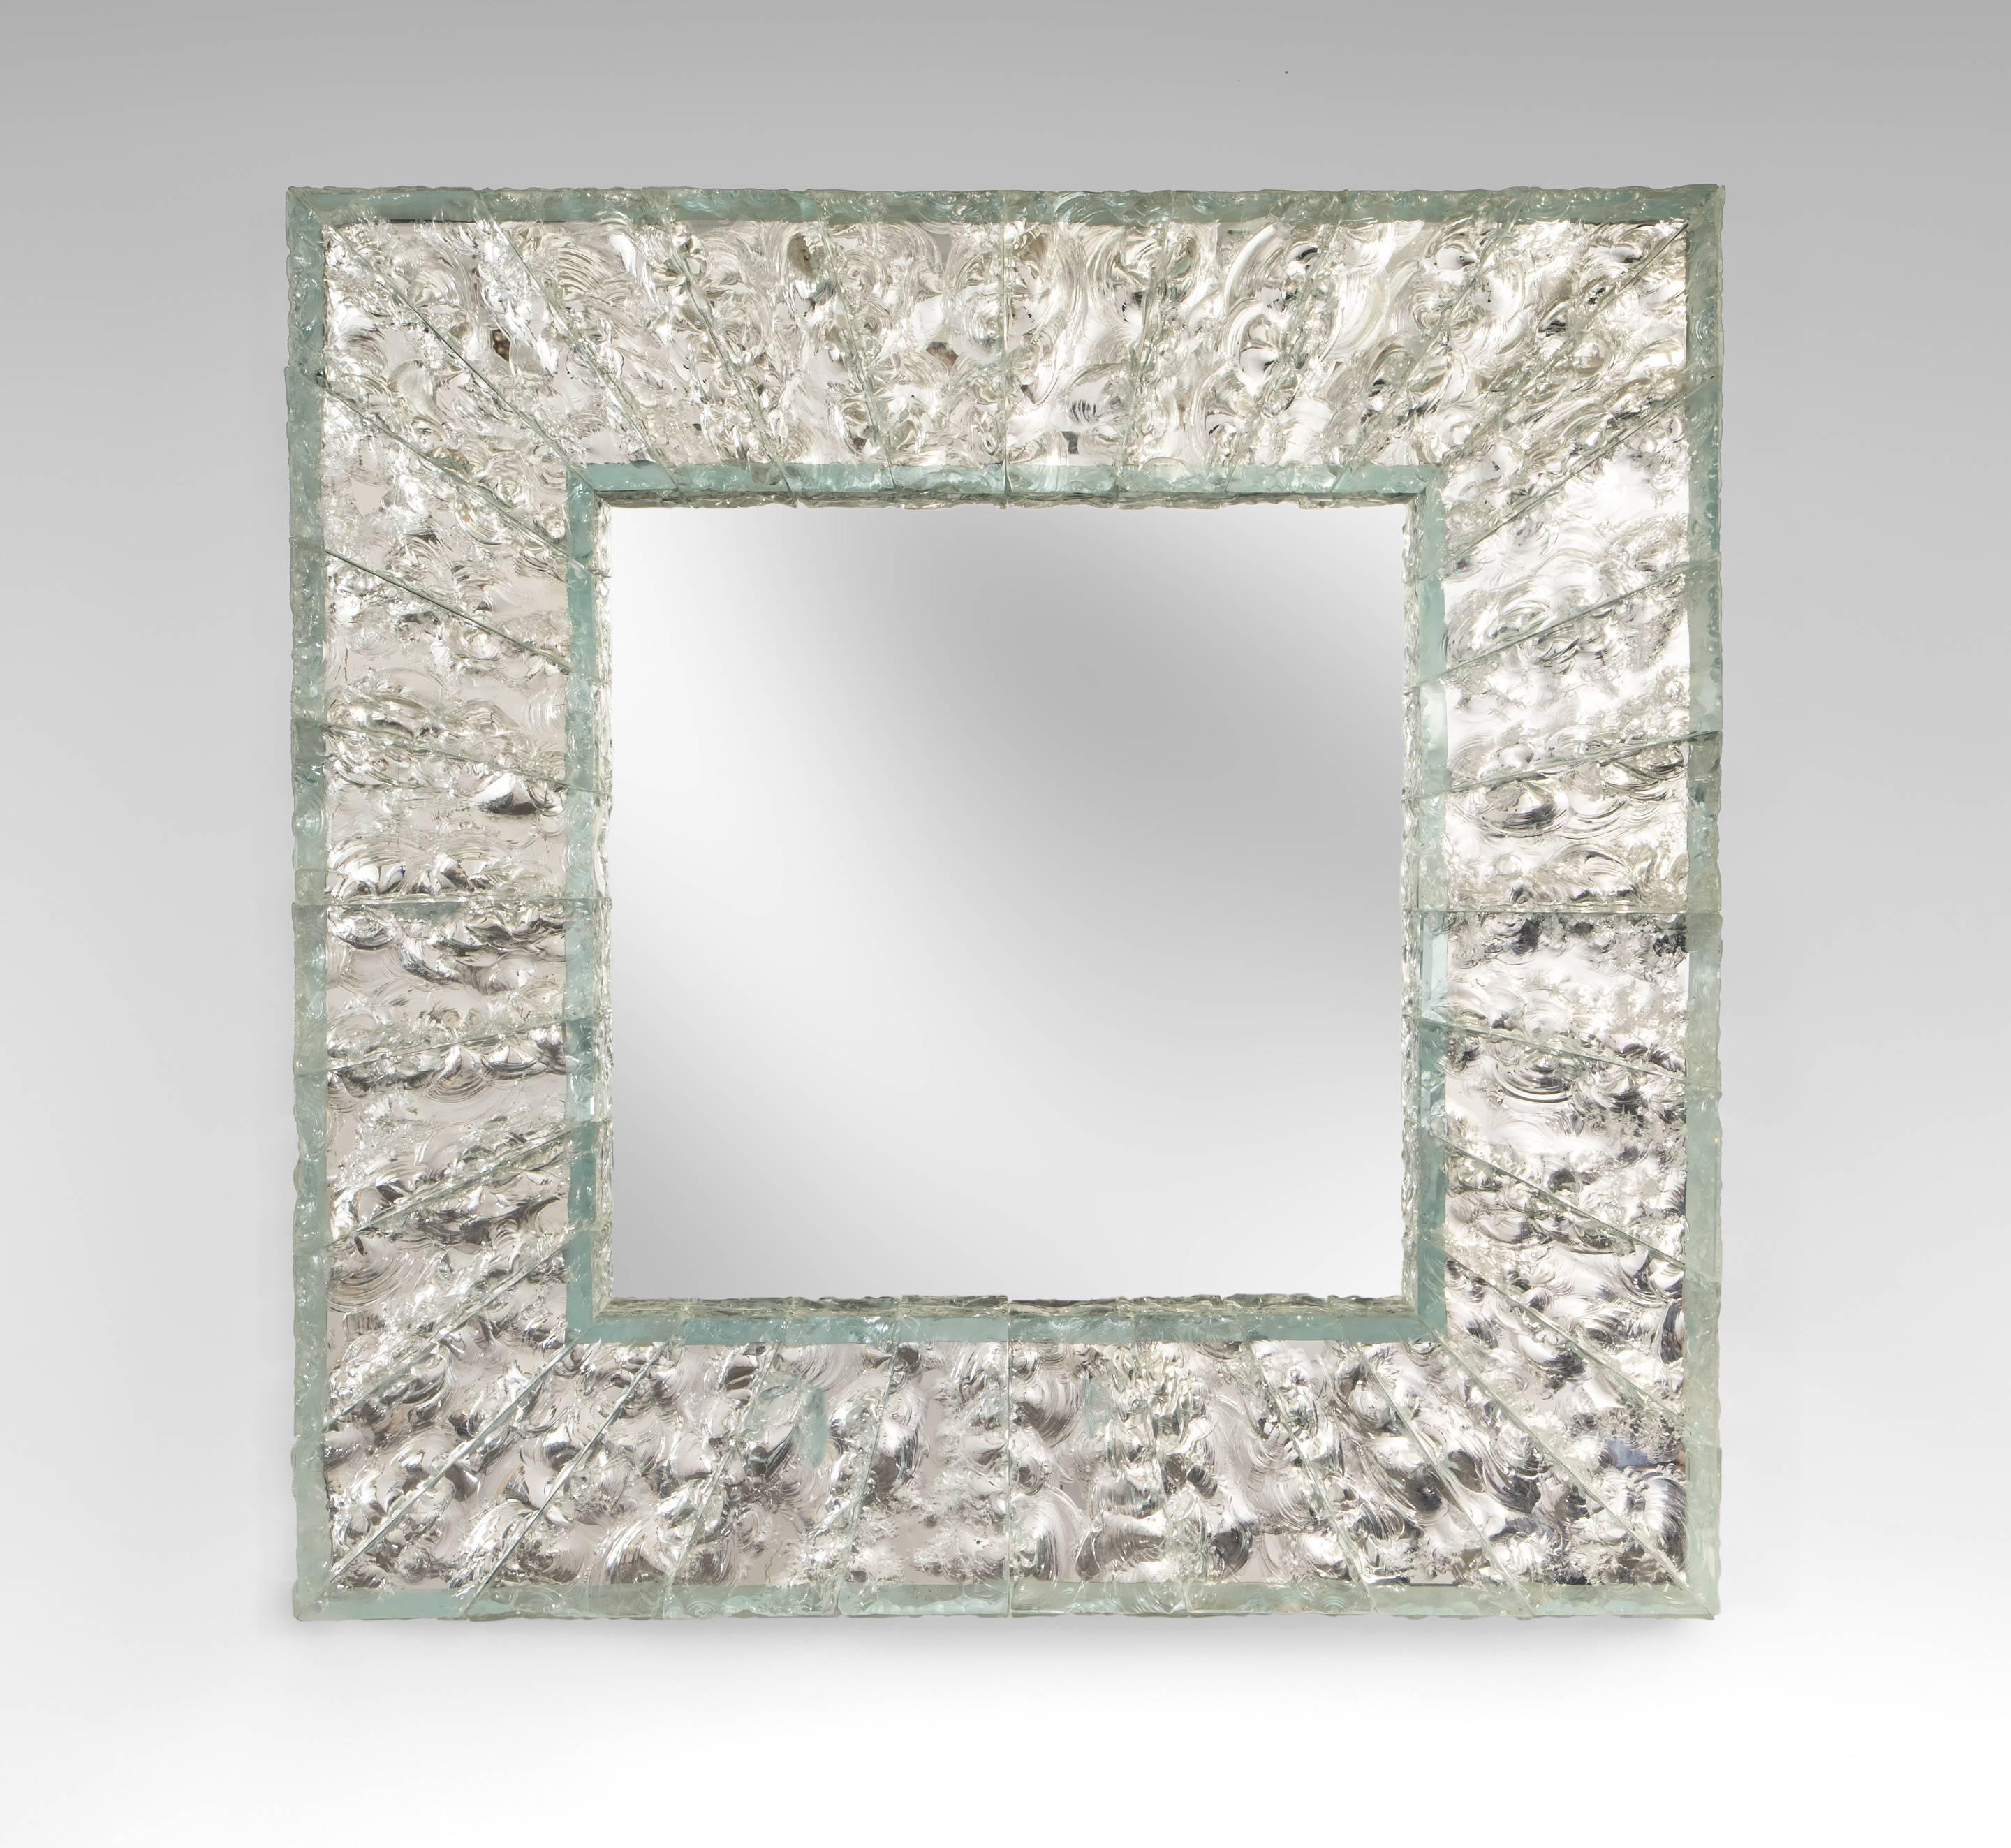 Roberto Rida, Pair of Large Martelé Colorless Glass Mirrors
Exceptional glass frames in a very desirable square format. Each square mirror plate within a frame composed of individual chiseled glass pieces.